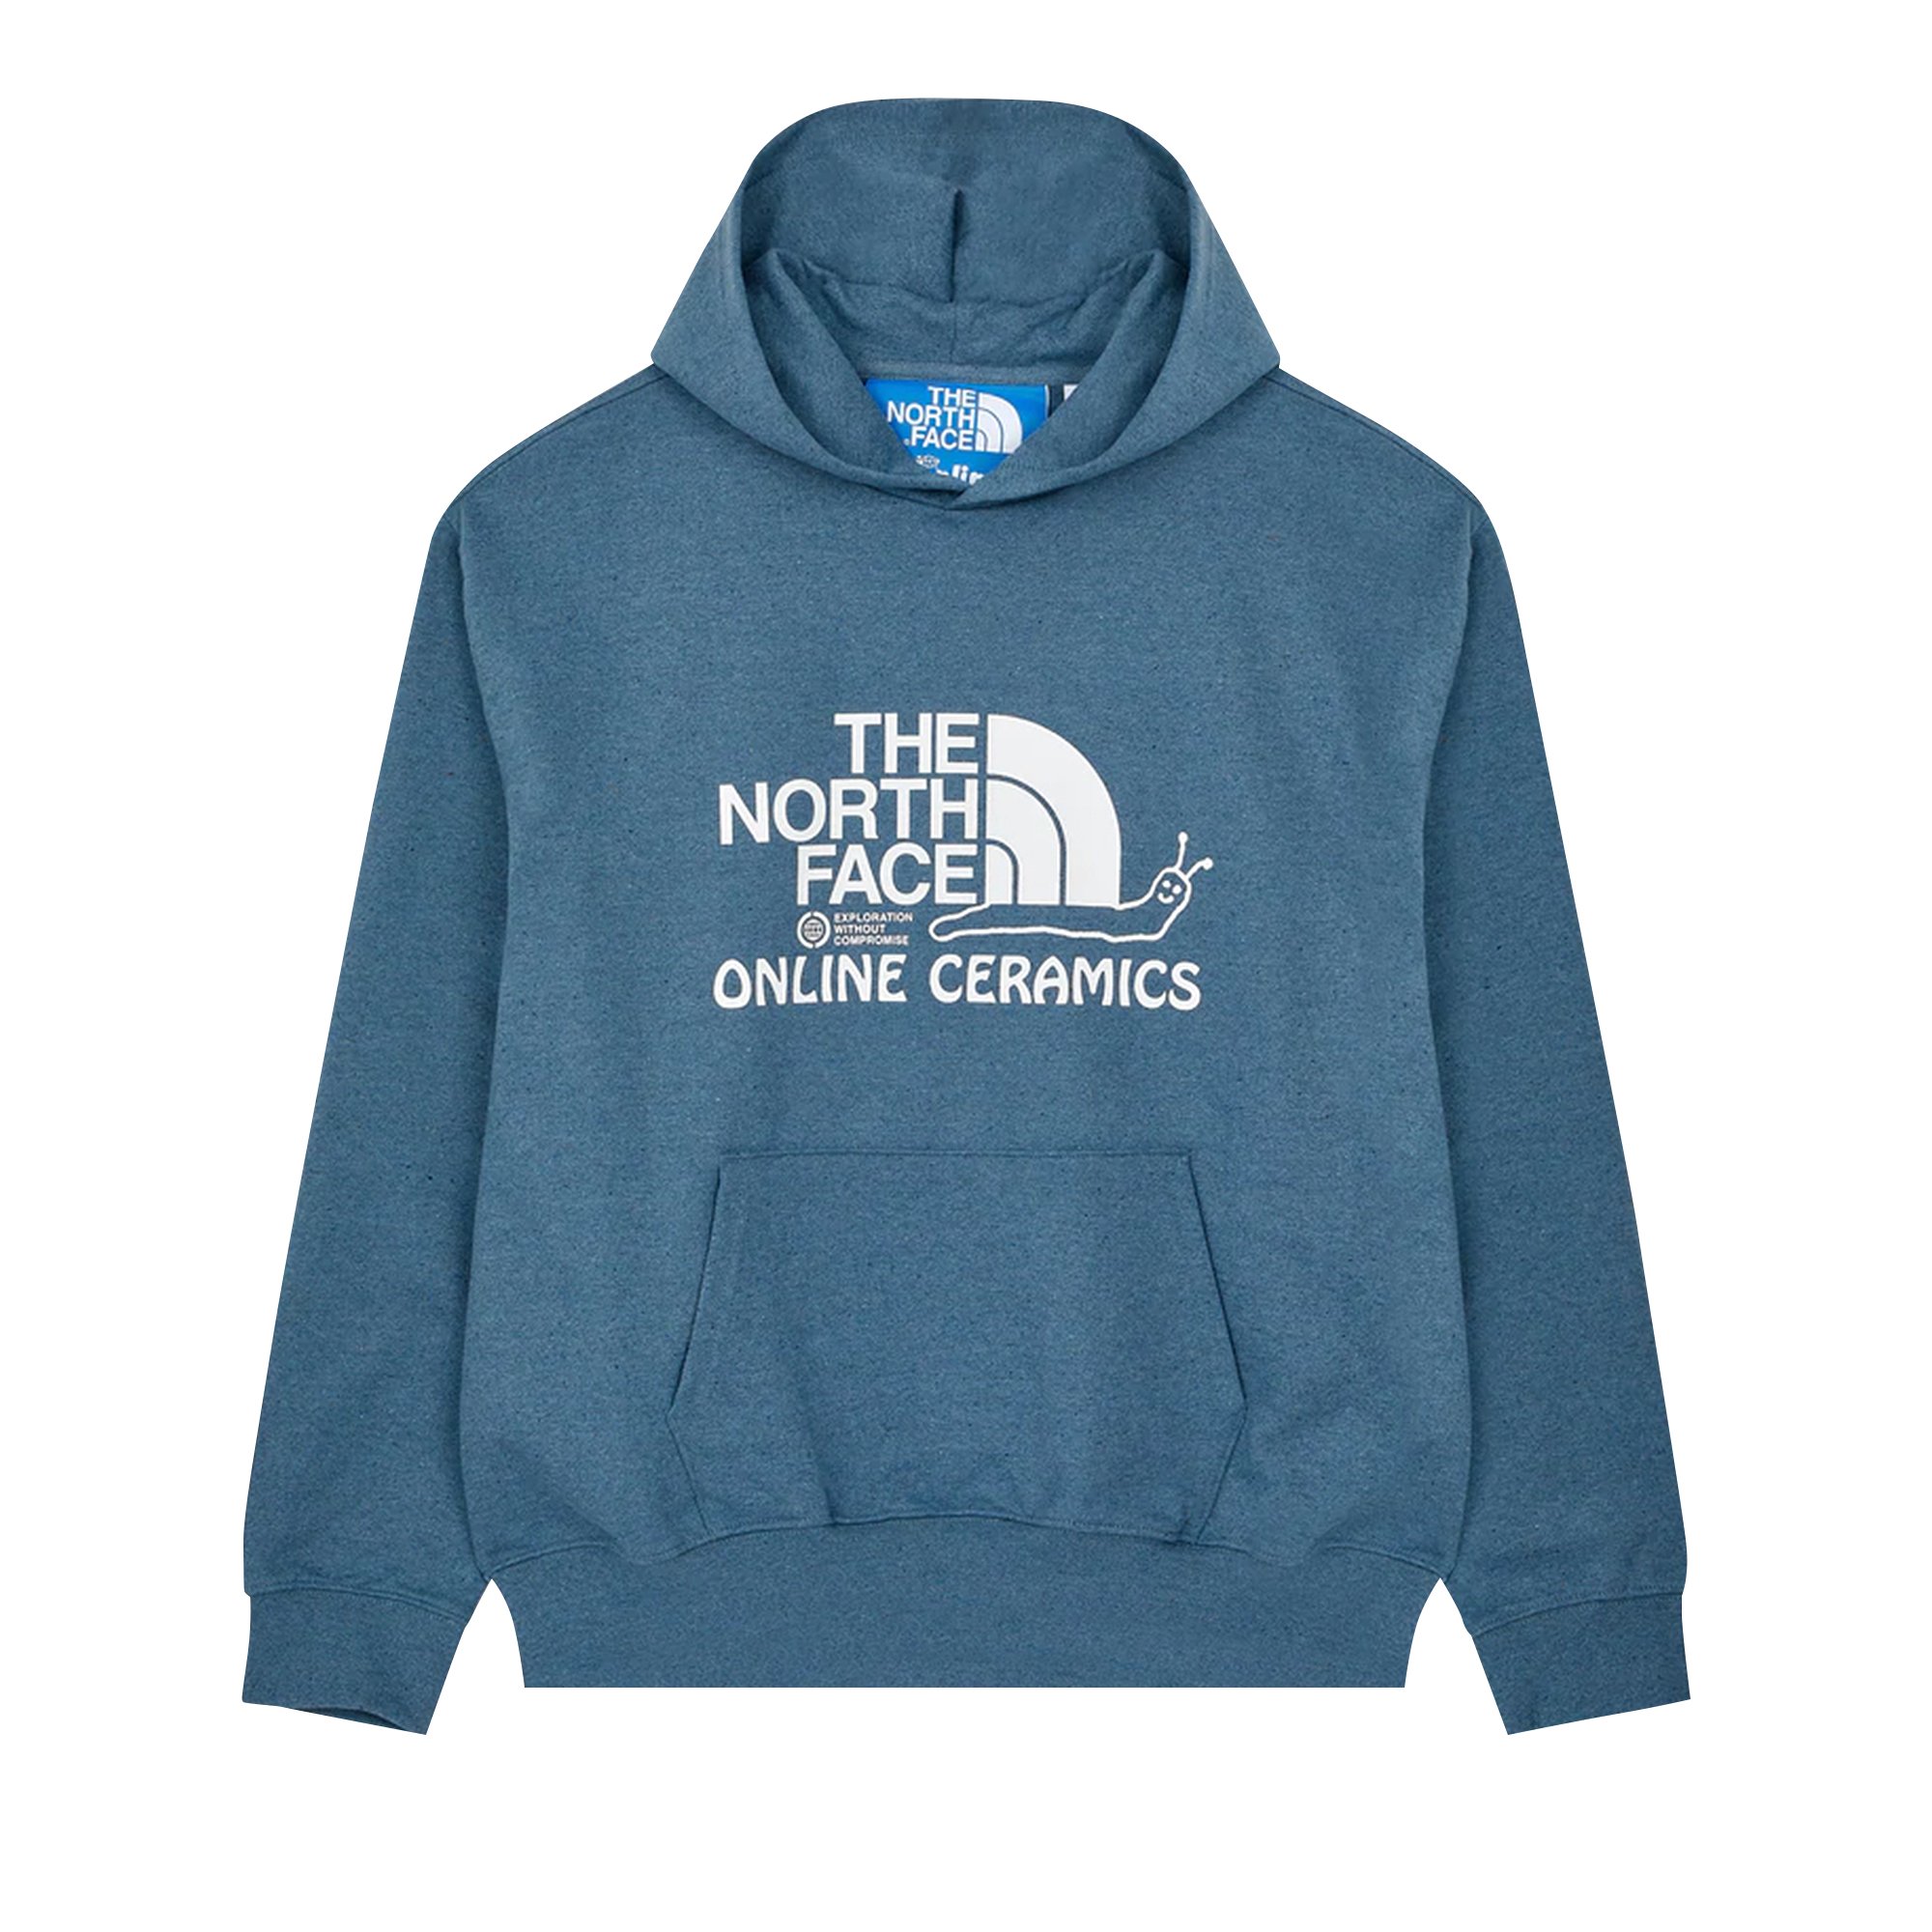 The North Face x Online Ceramics Graphic Hoodie 'Blue Regrind'